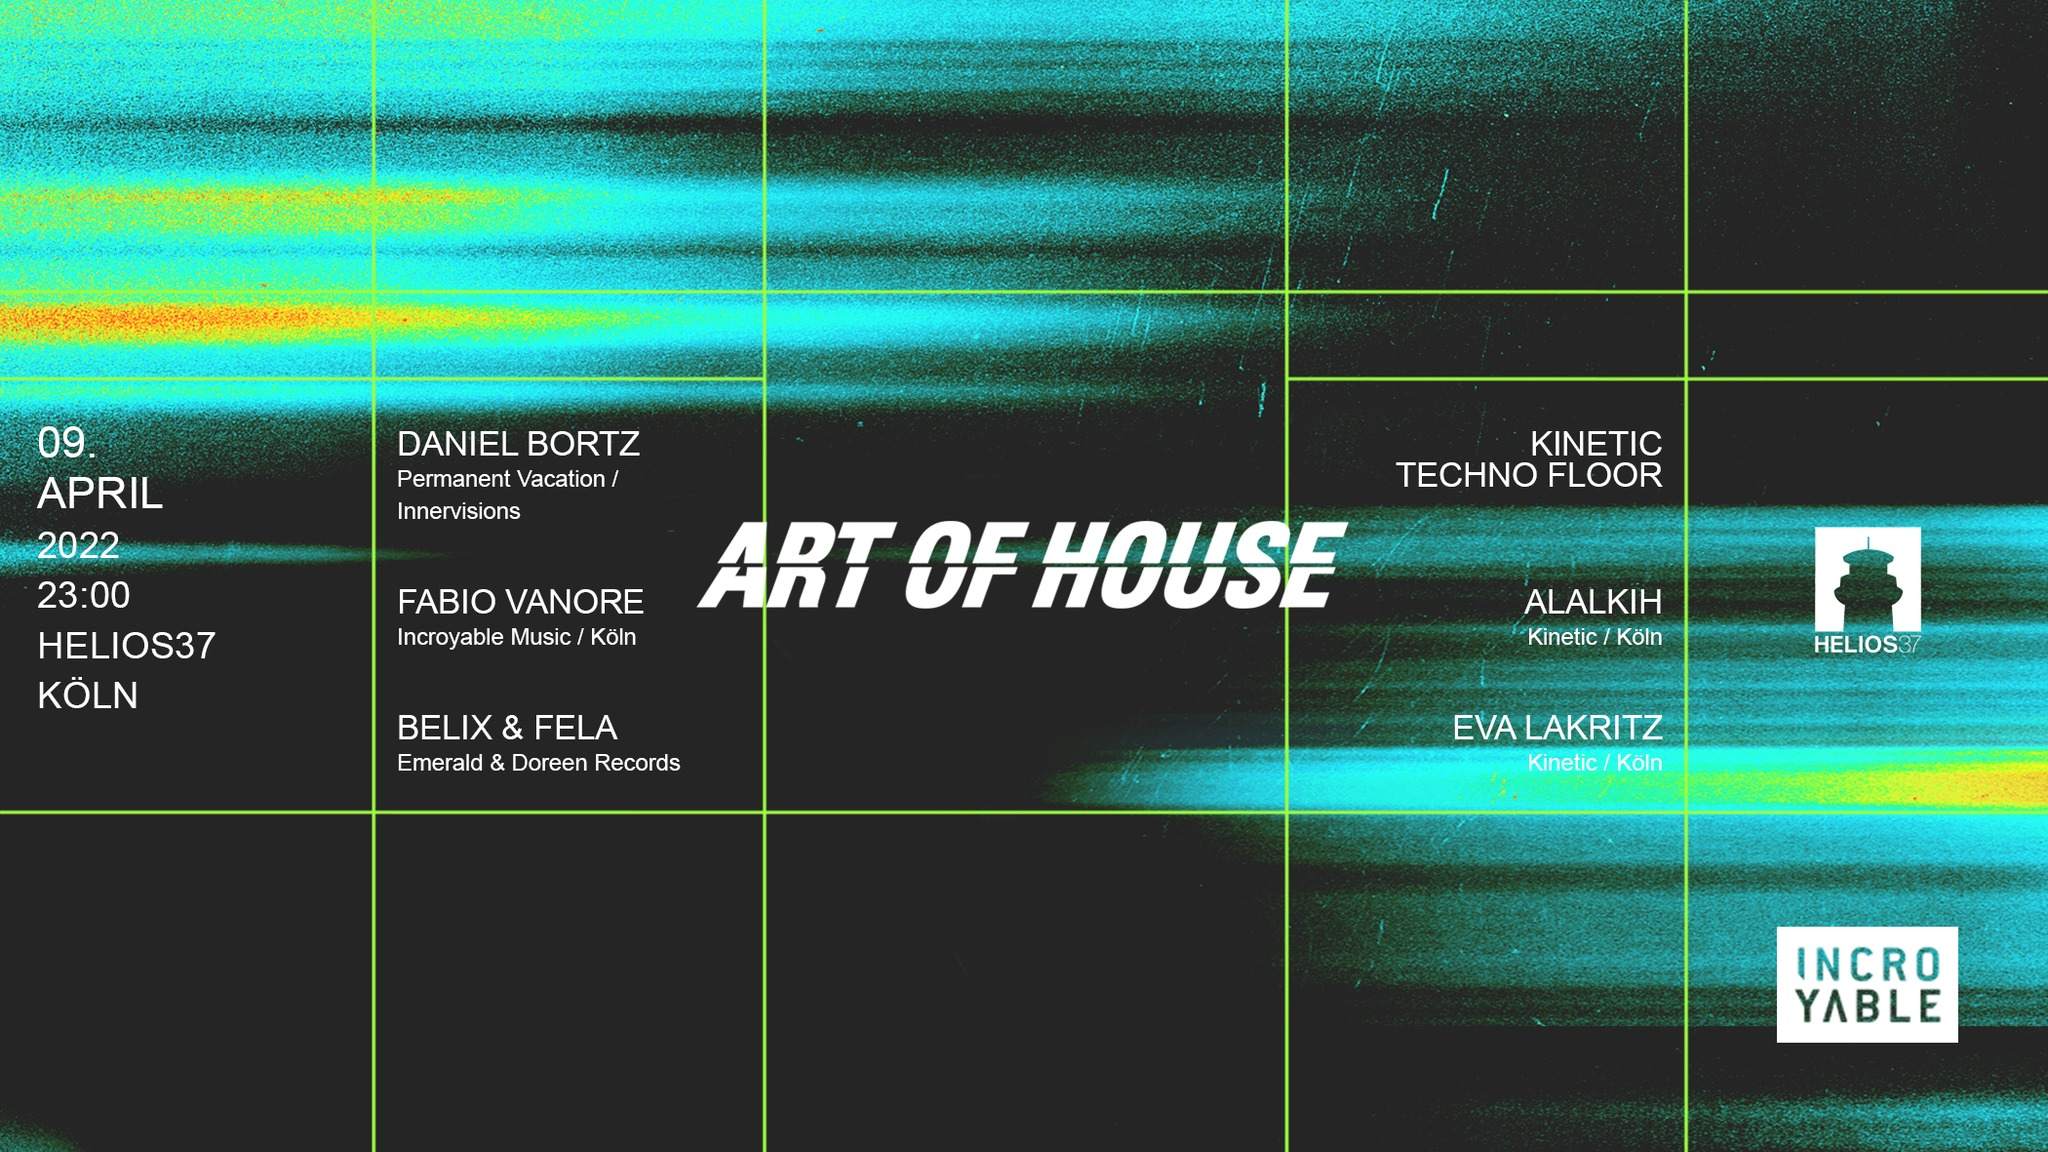 Art of House with DANIEL BORTZ (Innervisions) X Kinetic - フライヤー表